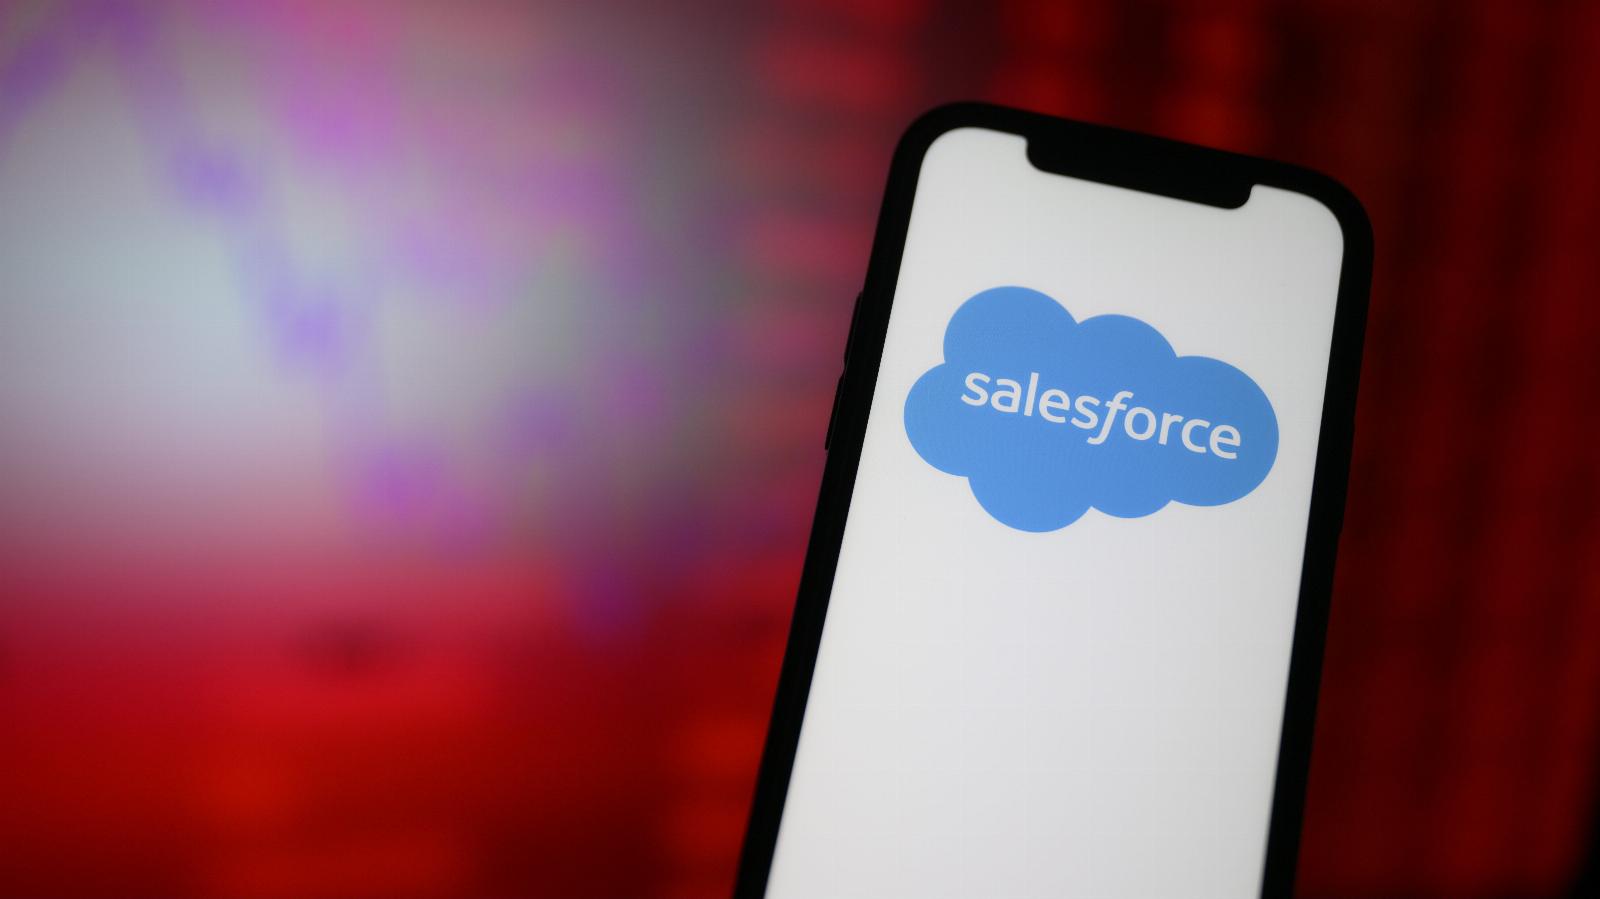 Unaric exits stealth with $35M to buy and consolidate Salesforce-ecosystem startups